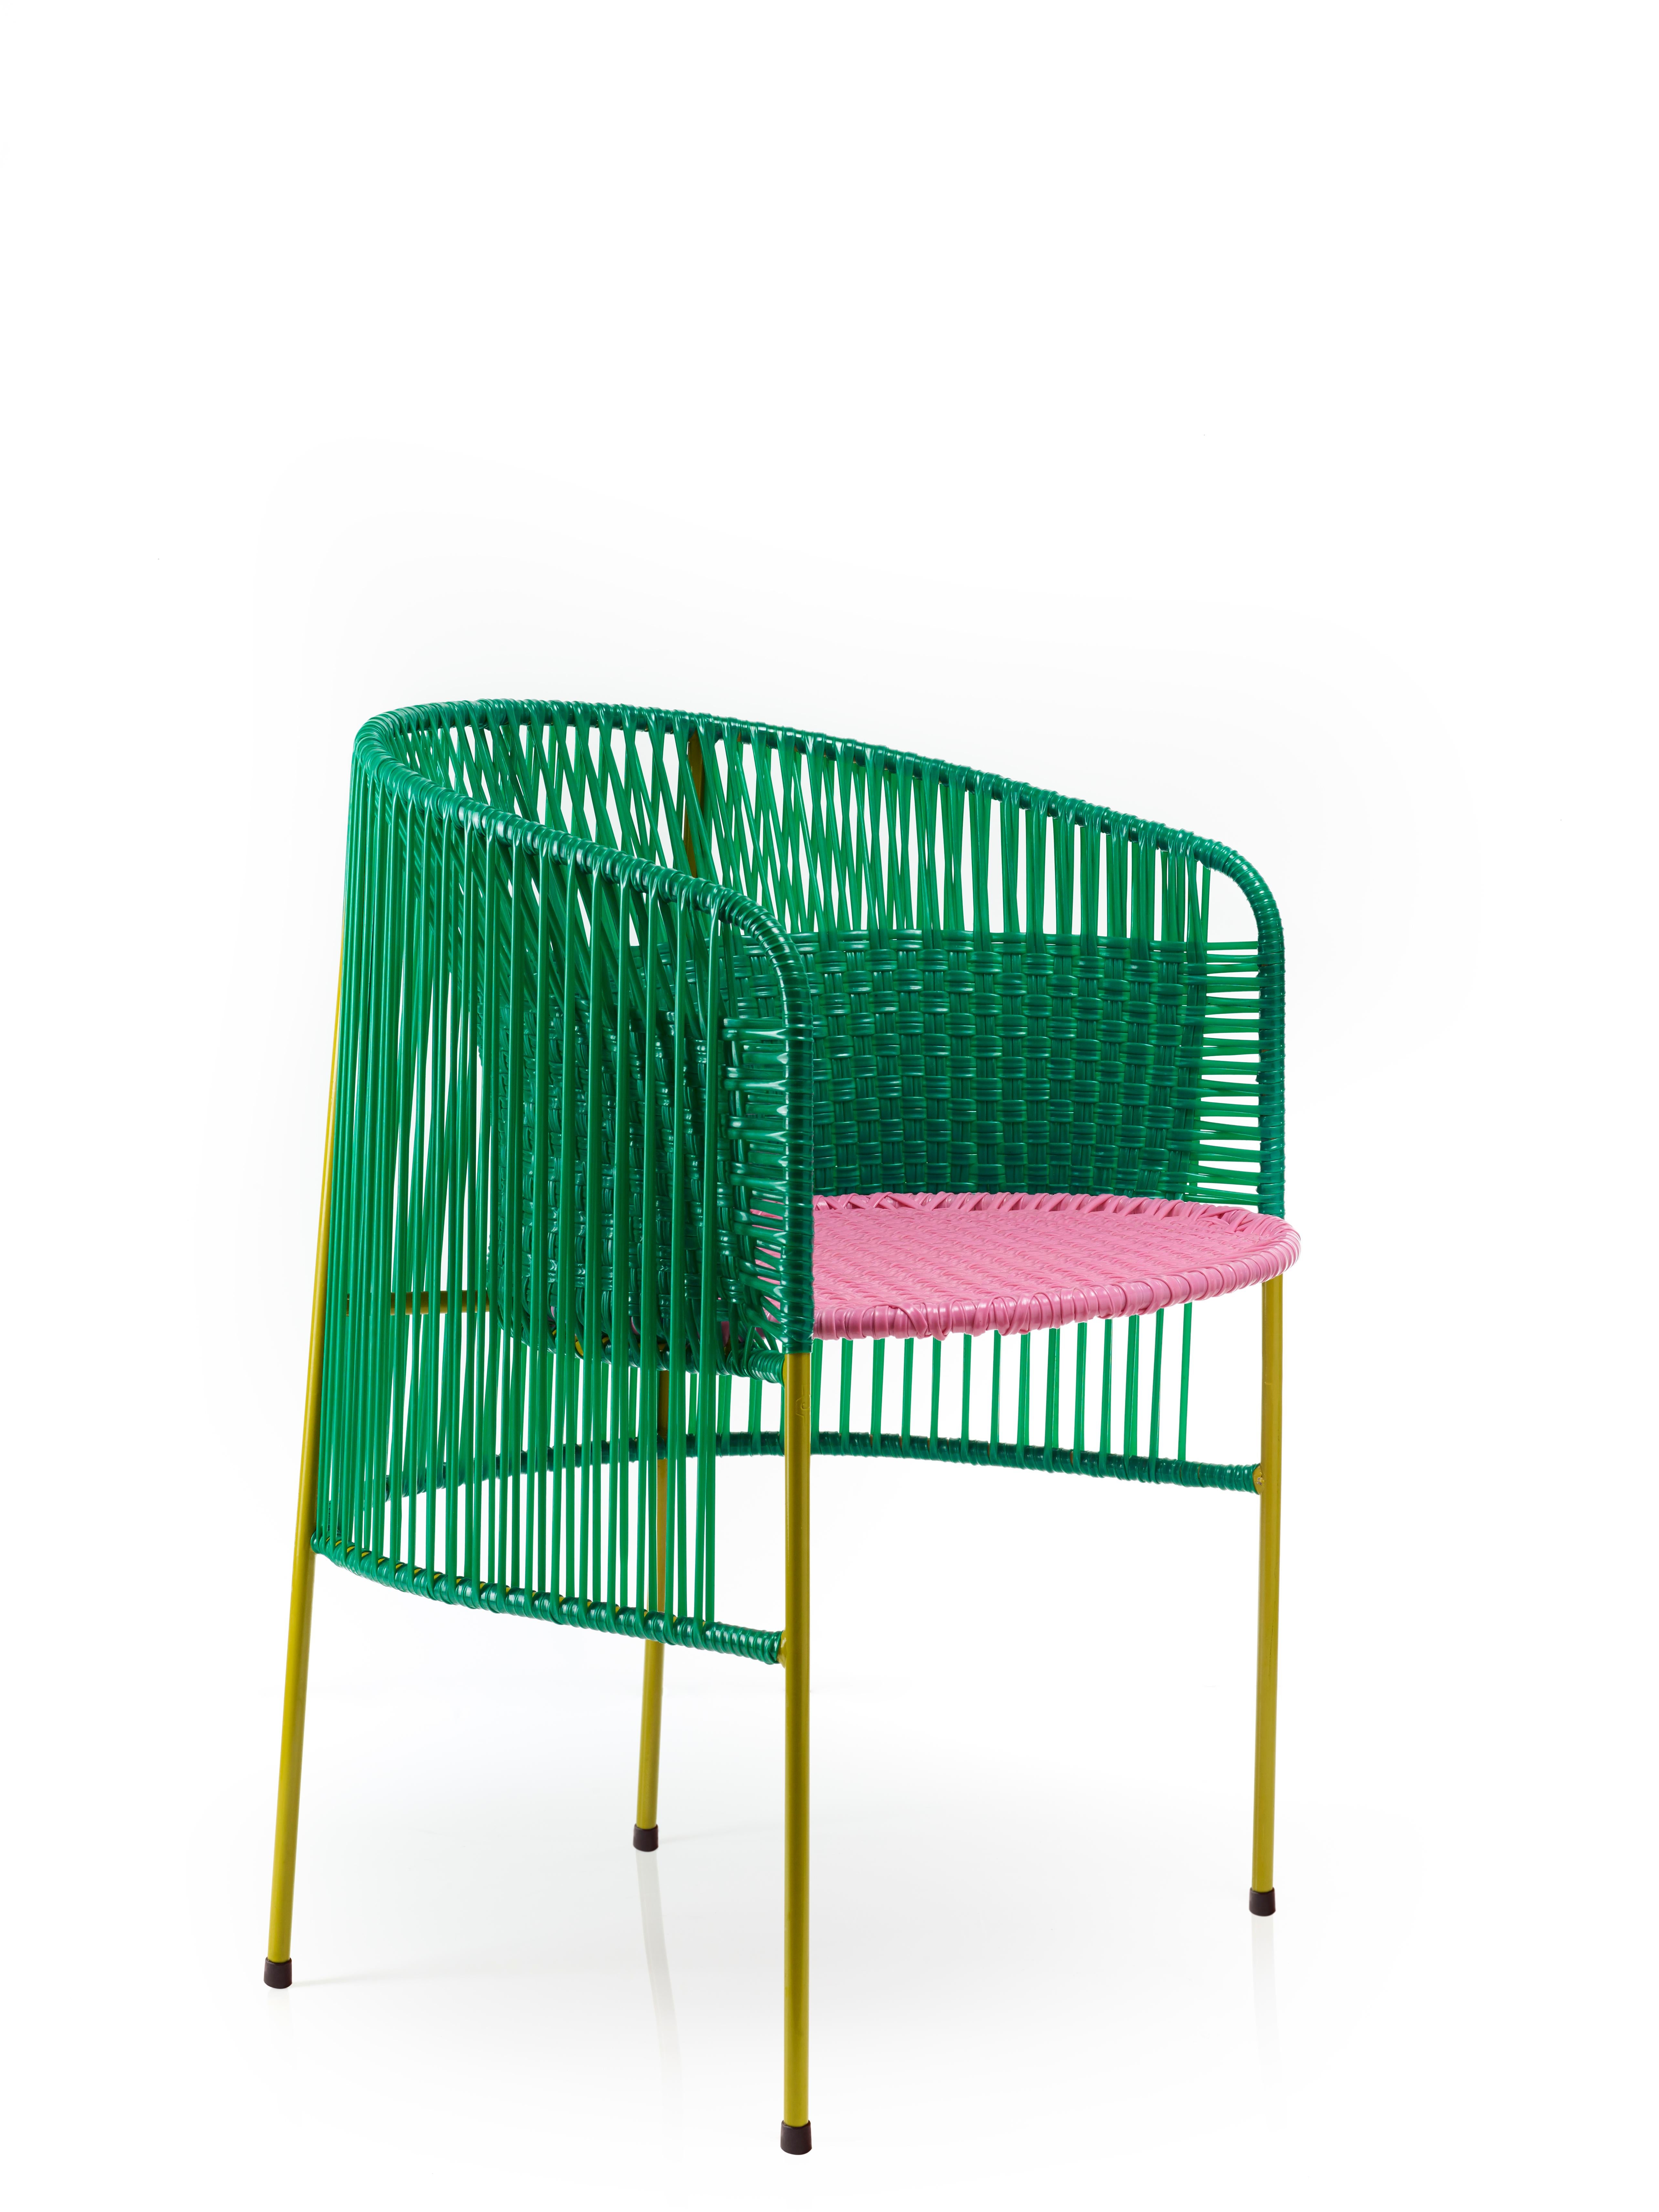 Set of 2 green caribe dining chair by Sebastian Herkner
Materials: Galvanized and powder-coated tubular steel. PVC strings are made from recycled plastic.
Technique: Made from recycled plastic and weaved by local craftspeople in Colombia.